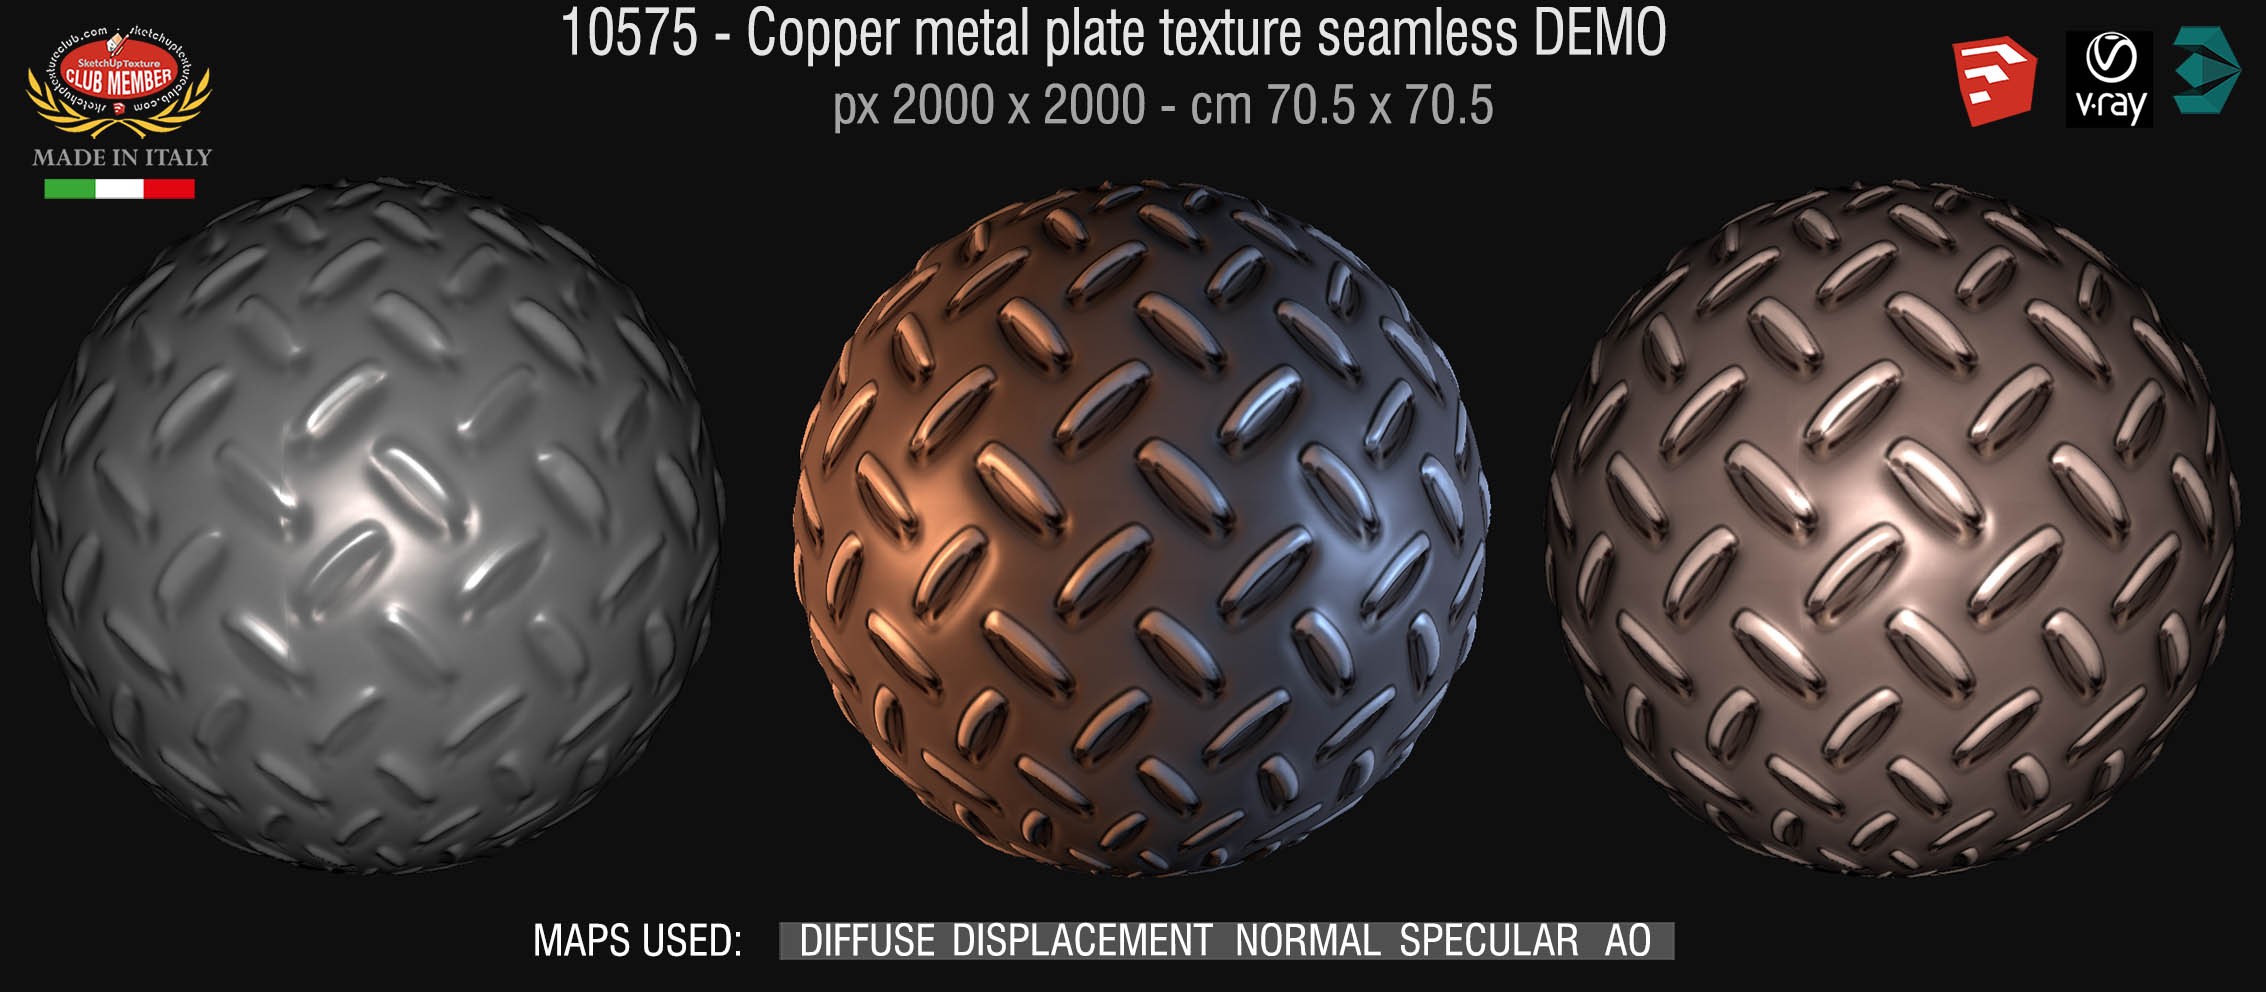 10575 HR Copper metal plate texture seamless + maps DEMO